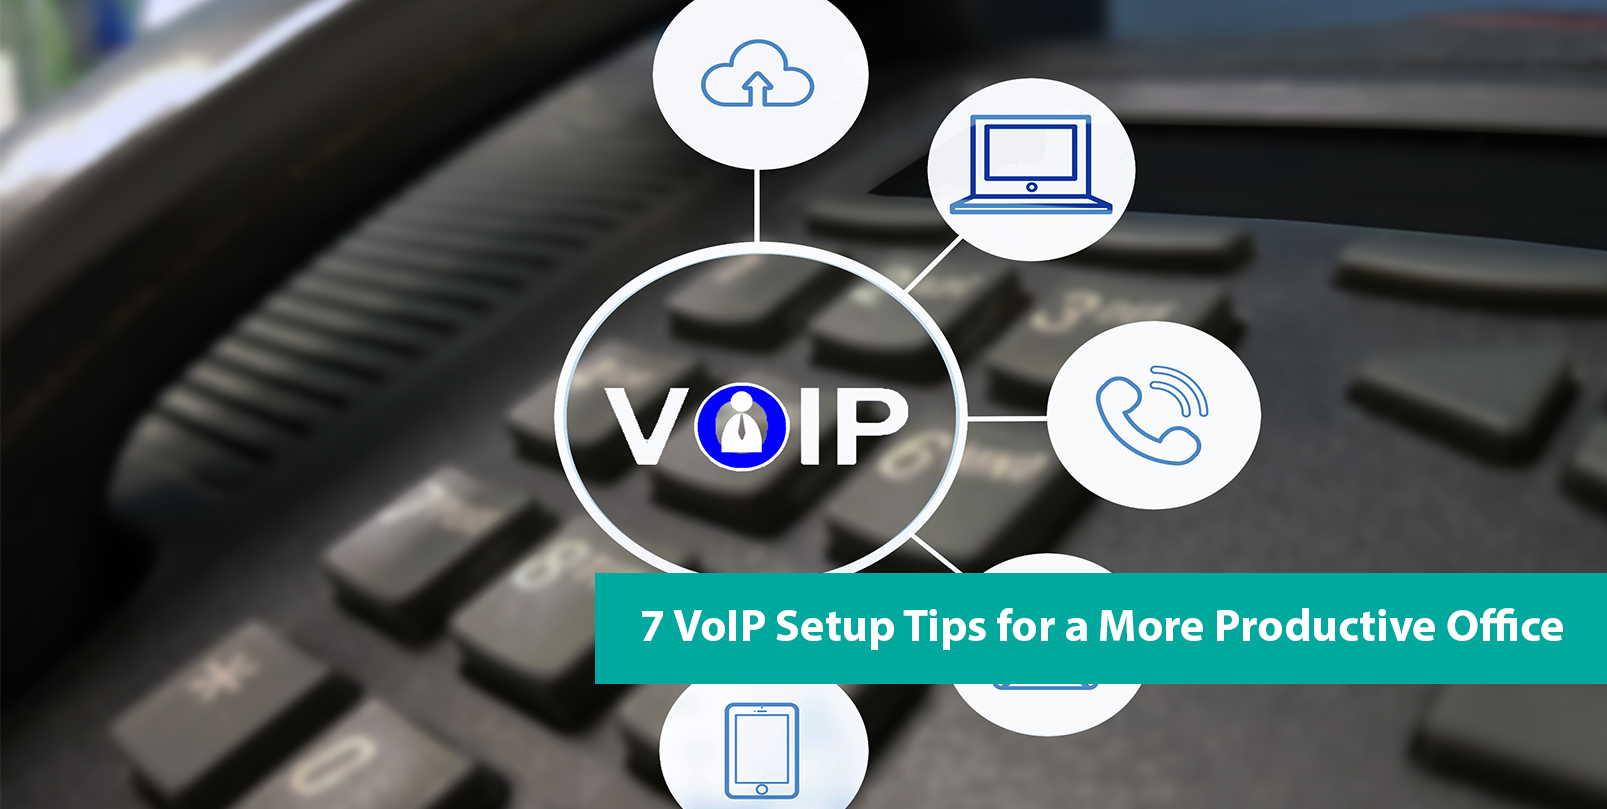 Cloud, laptop, and phone icons shown against a picture of a desktop phone, and text says VoIP.